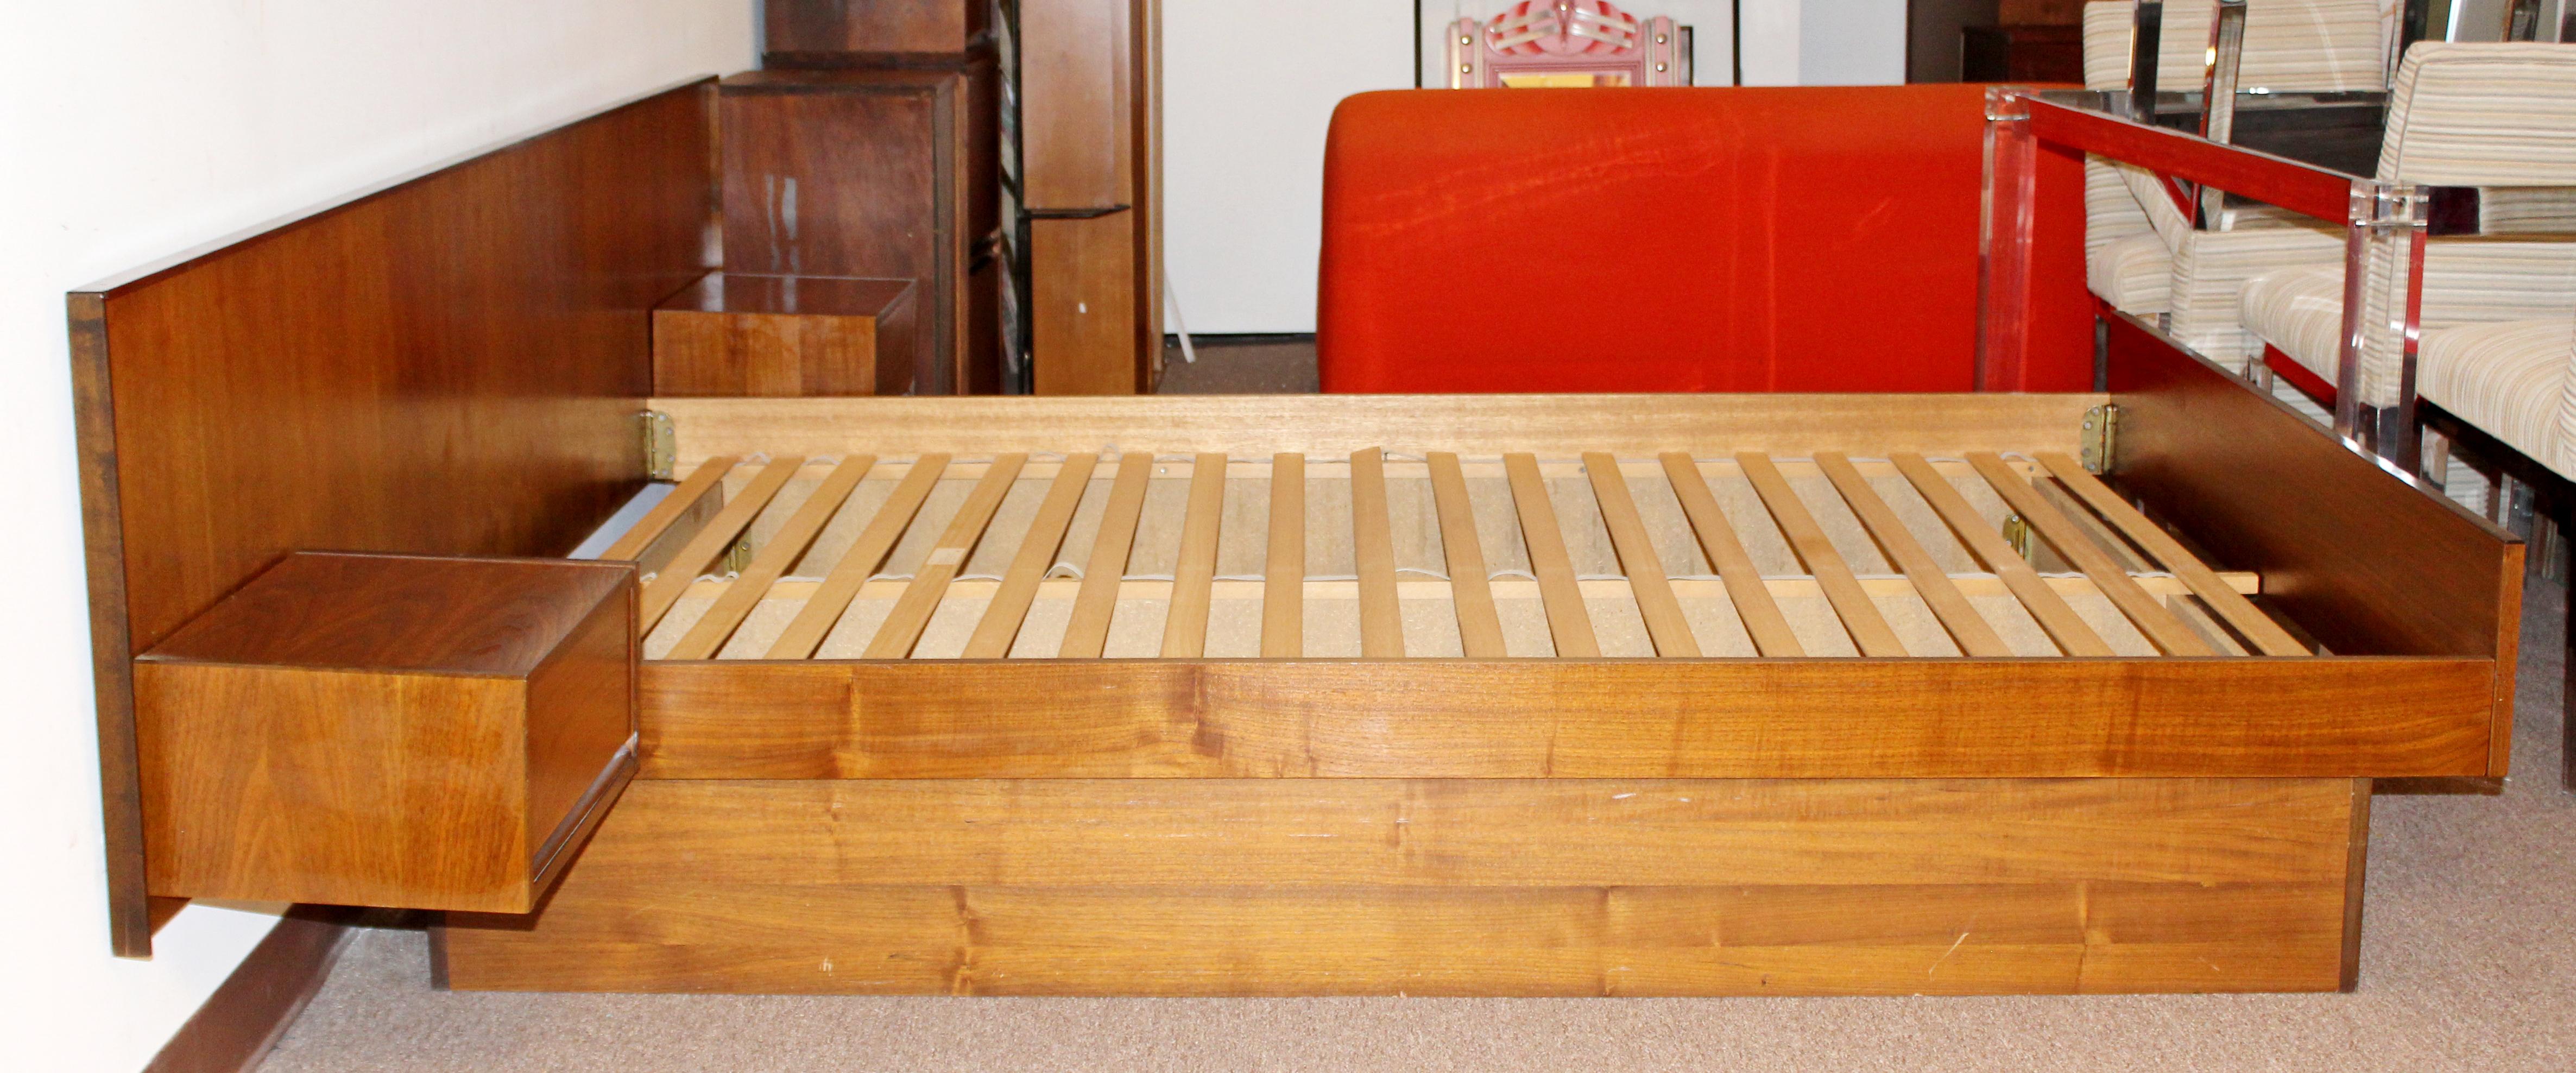 For your consideration is a magnificent, walnut wood platform bed frame, for a Queen size, with attached floating drawers on the headboard, made in Denmark, circa 1960s. In excellent vintage condition. The dimensions of the headboard are 101